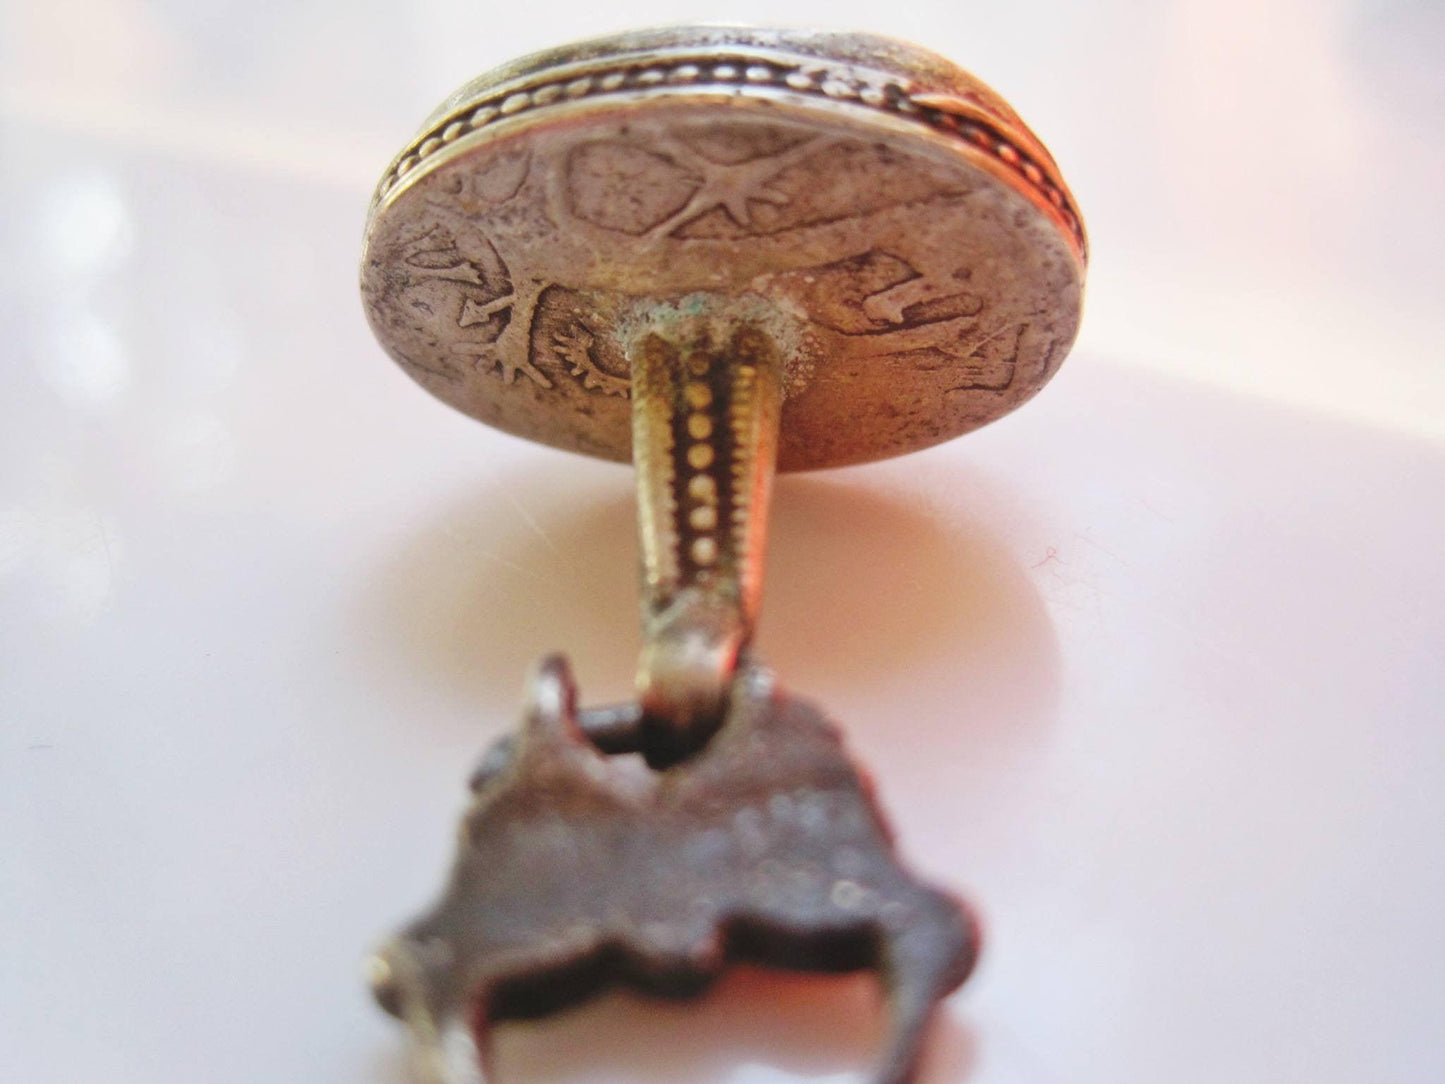 Antique Islamic Silver Seal Fob or Pendant with Carved Agate - Anteeka